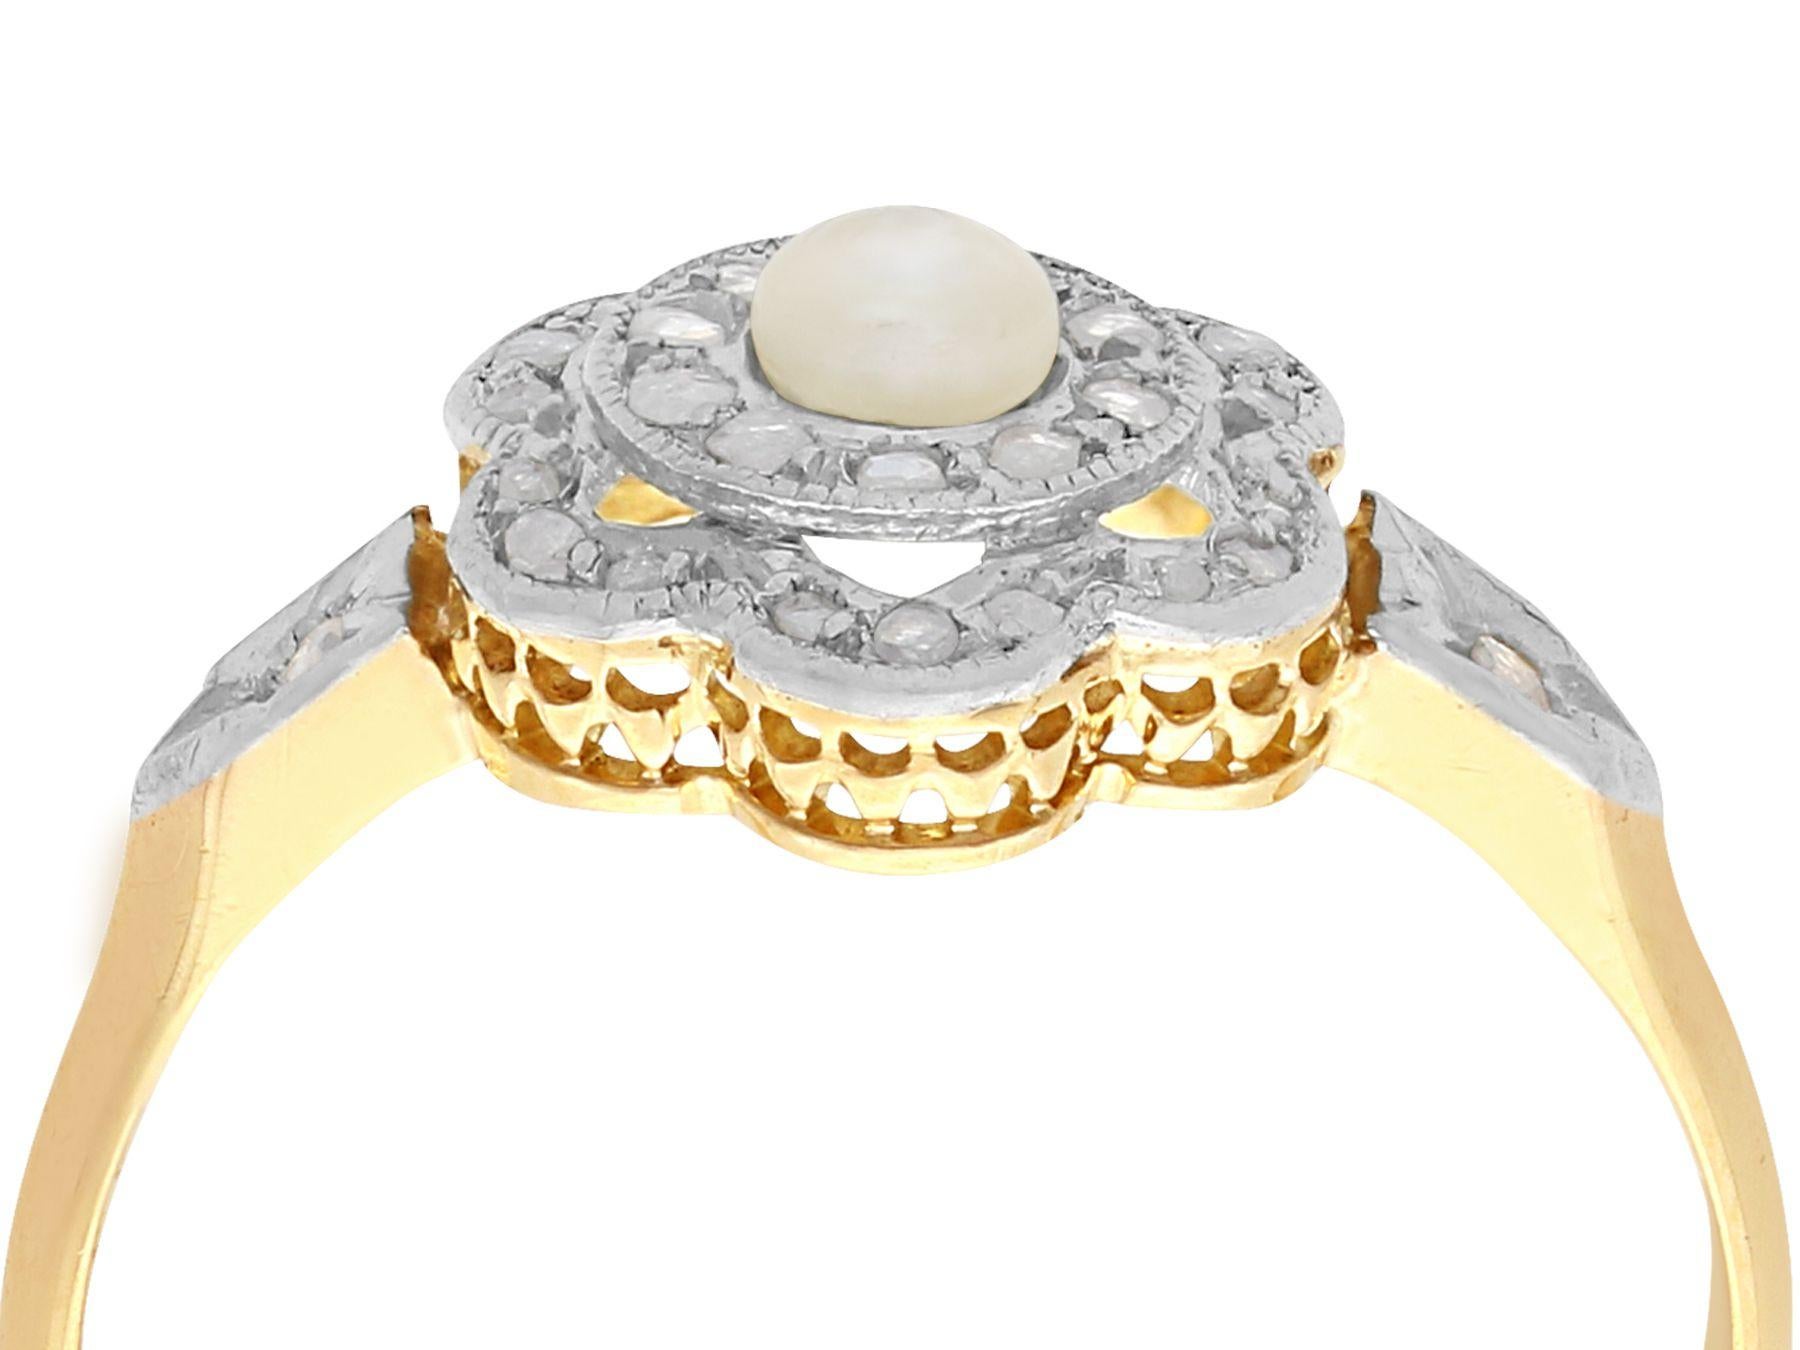 An impressive antique French 0.18 carat diamond and seed pearl, 18 karat yellow and white gold dress ring; part of our diverse antique jewelry collections.

This fine and impressive seed pearl and diamond ring has been crafted in 18k yellow gold